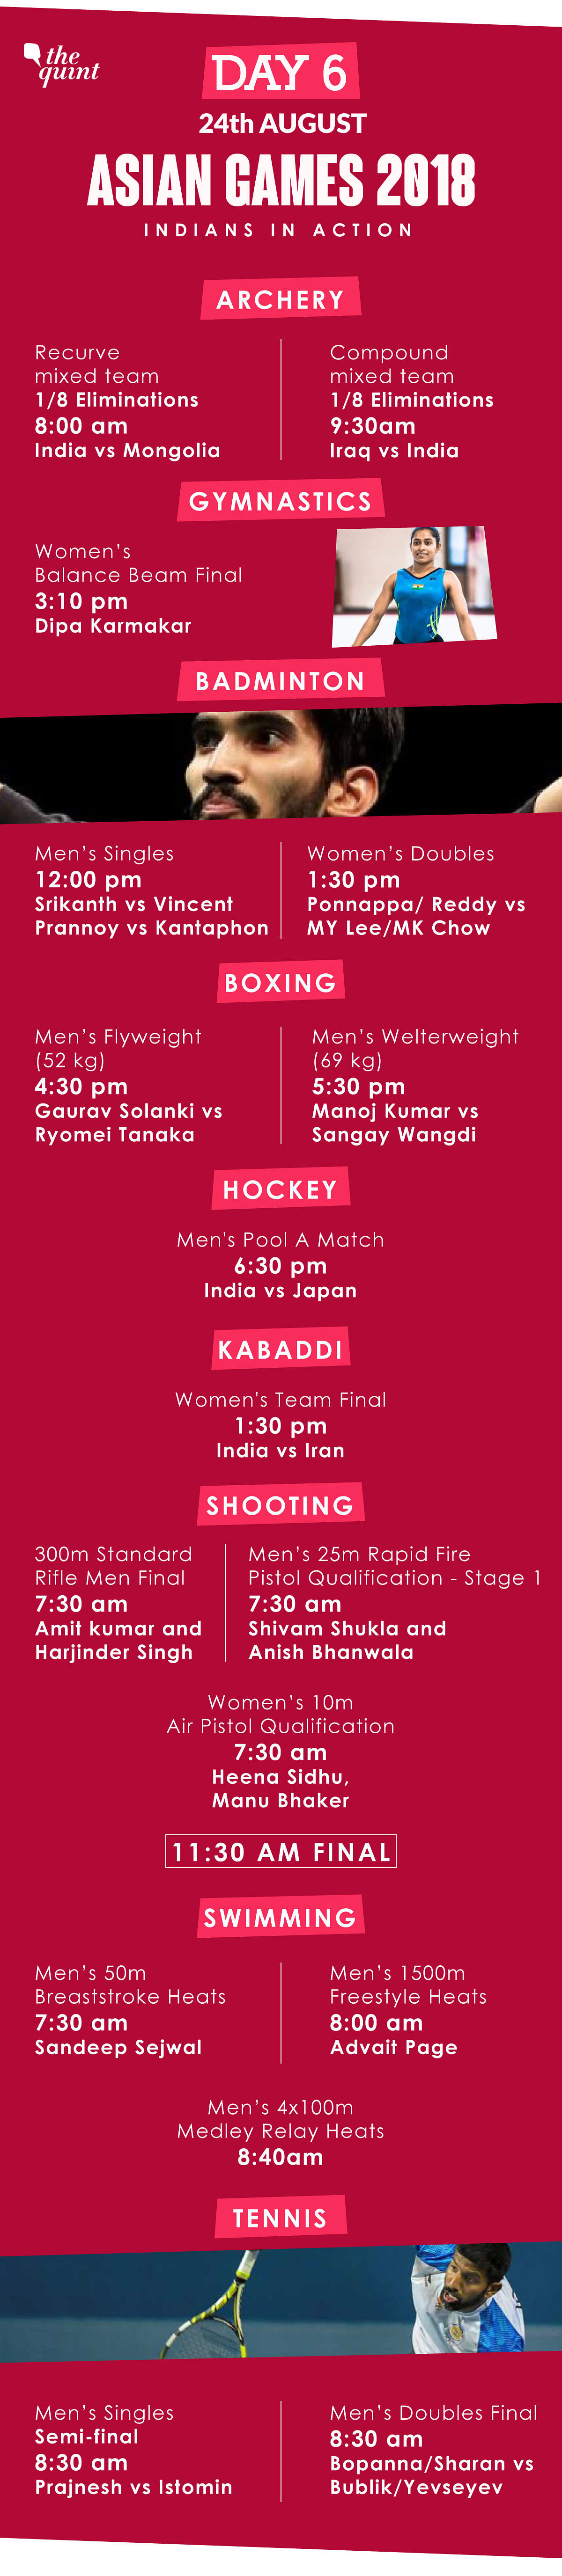 All the major events for the Indian contingent on Day 6 of the Asian Games in Indonesia on 24 August.